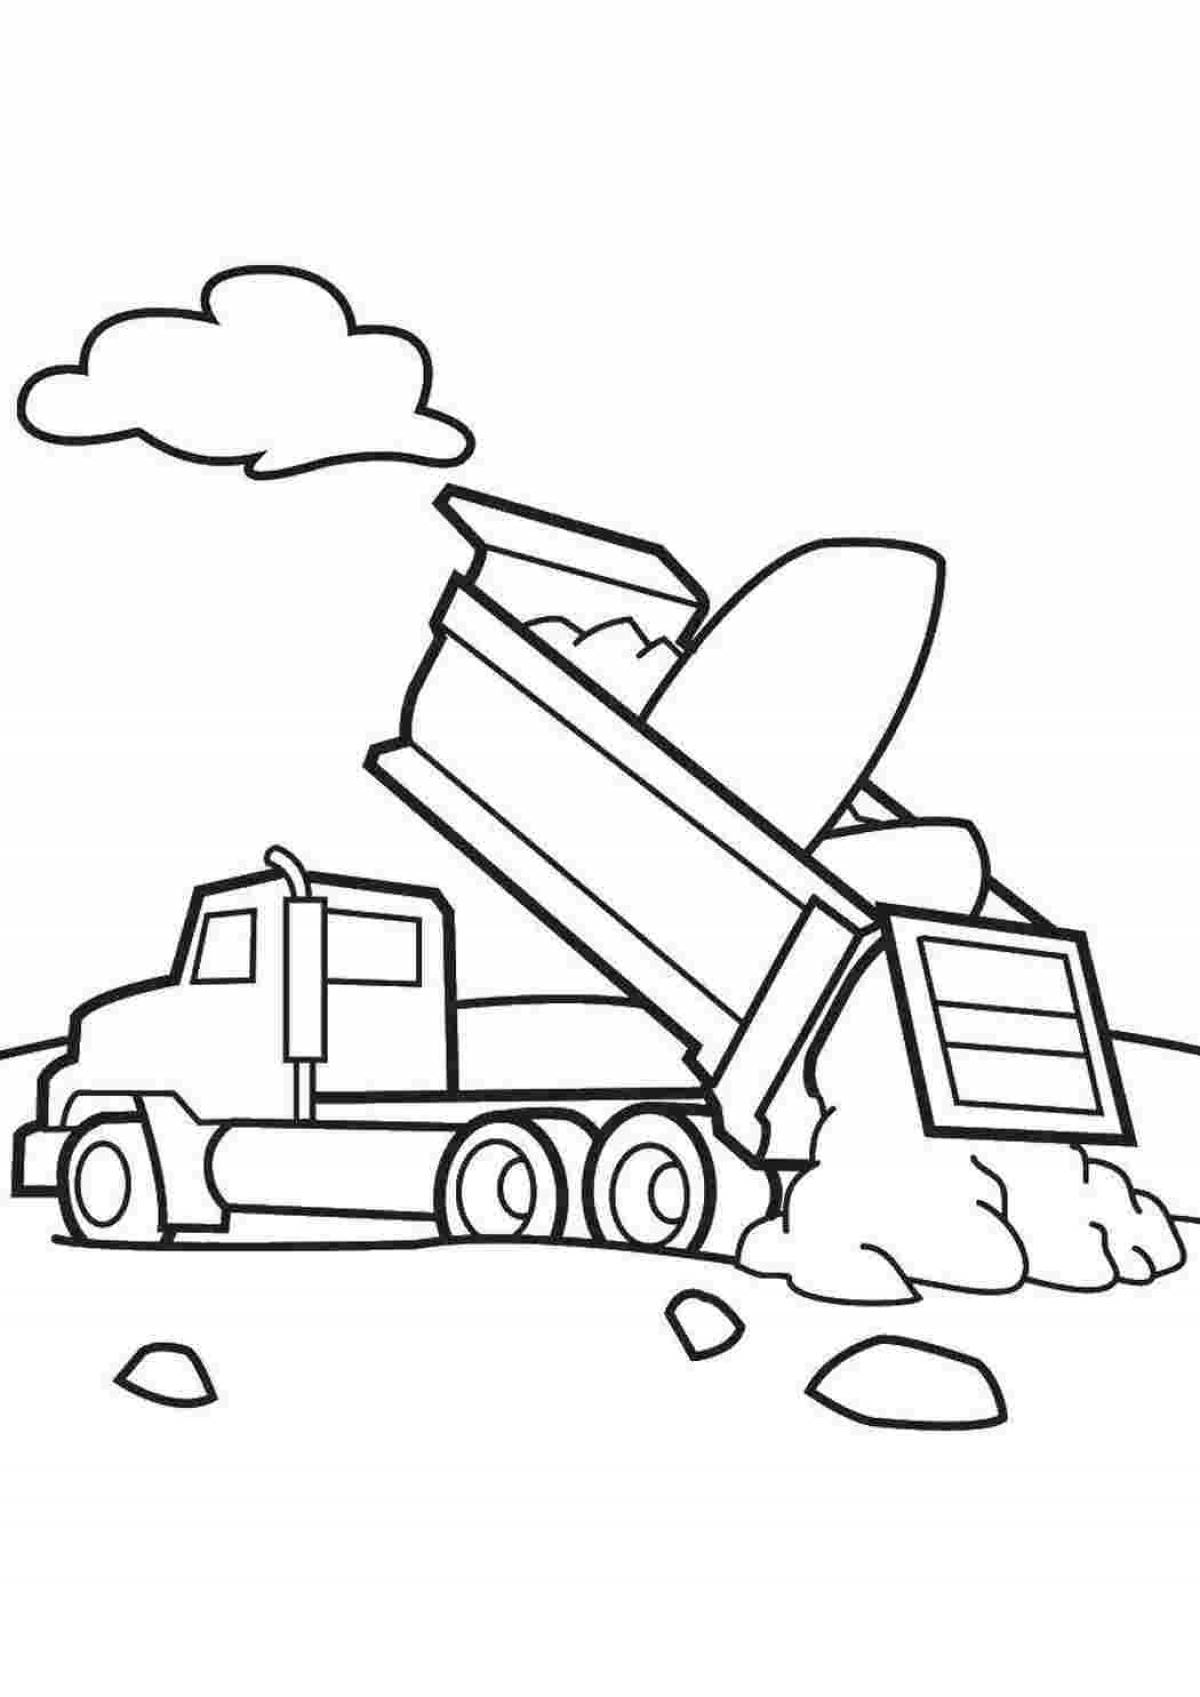 Violent truck coloring pages for boys